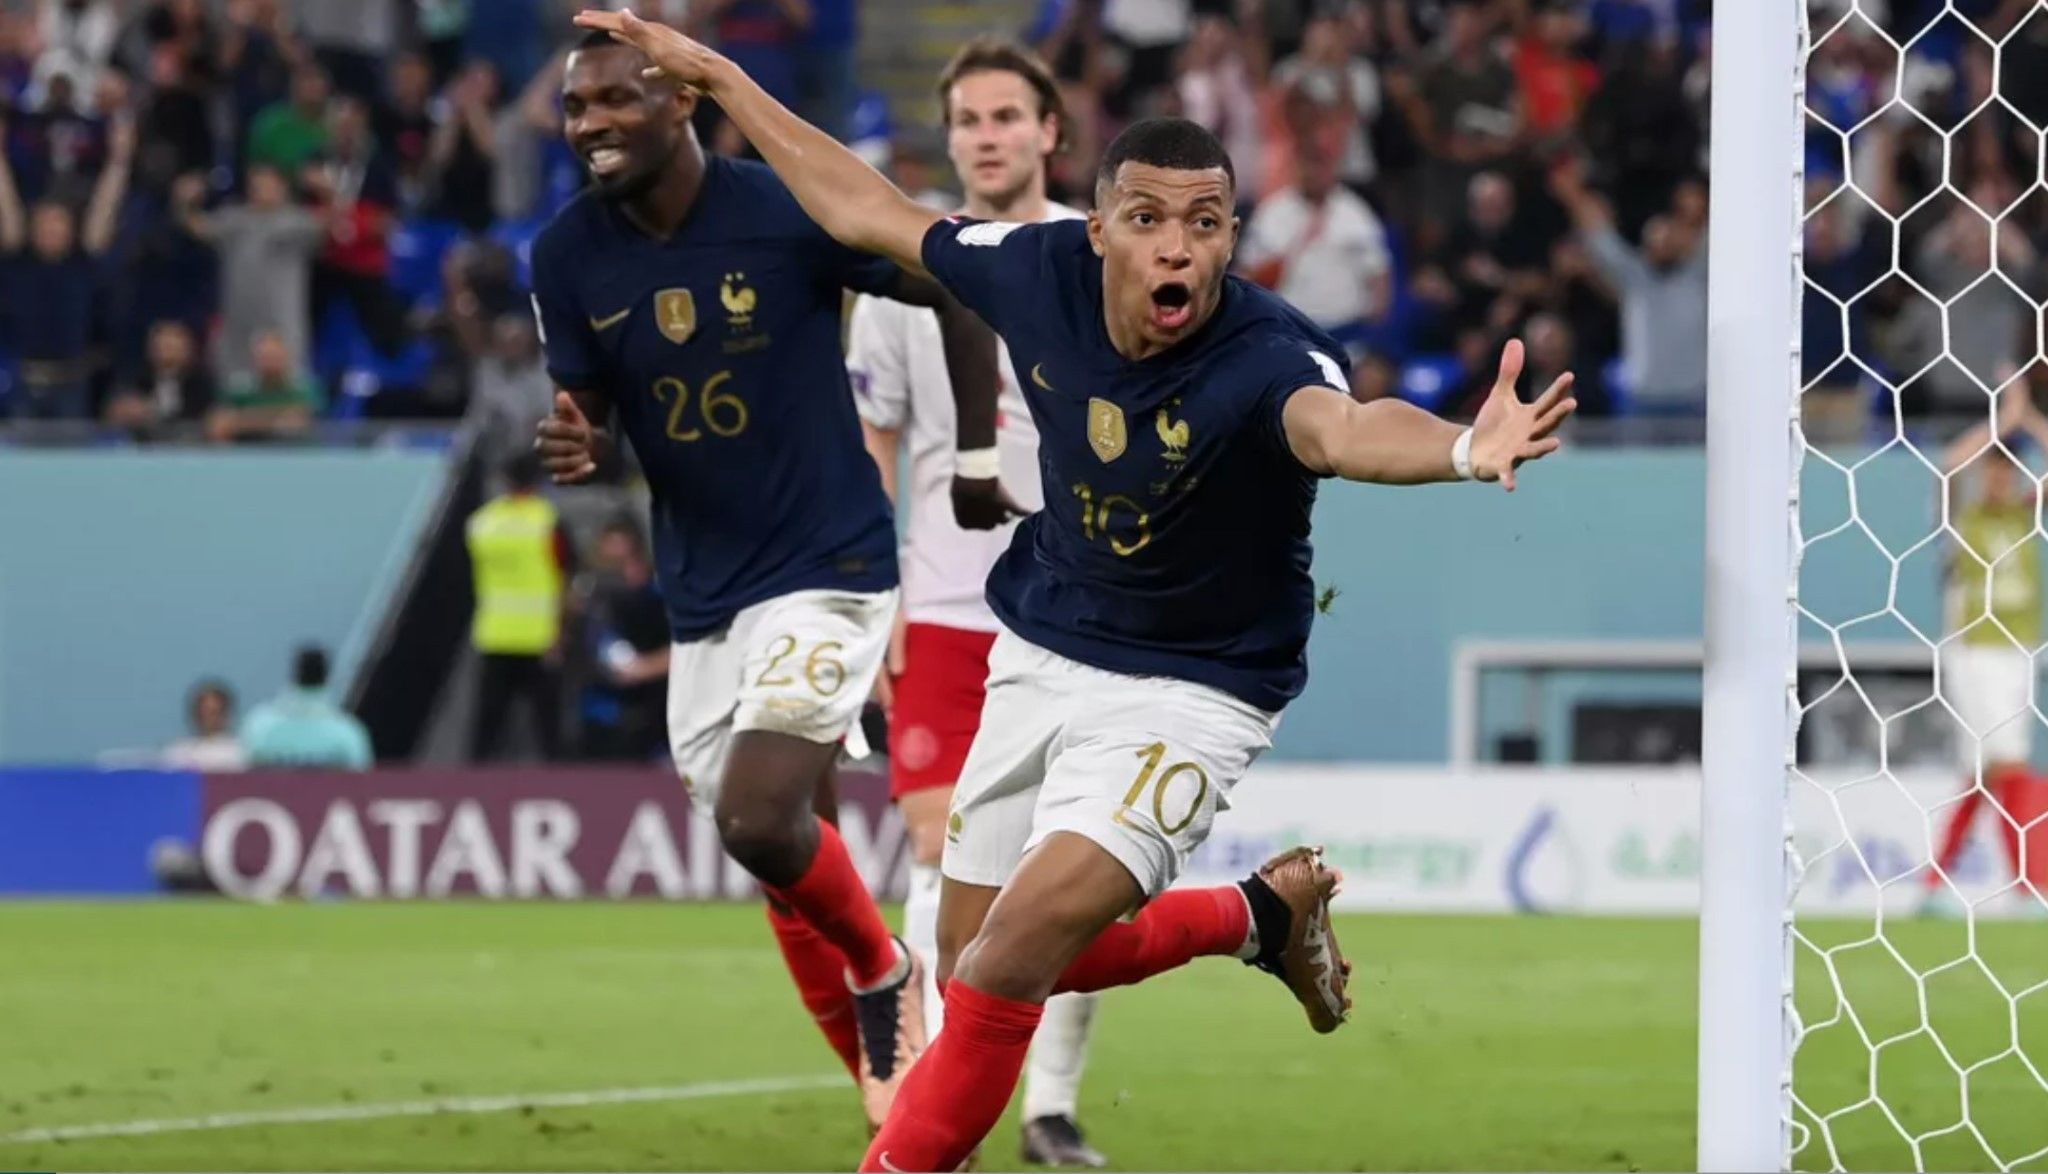 France vs Poland, December 4: Head-to-Head Statistics, Line-ups, Prediction for the 2022 World Cup Match